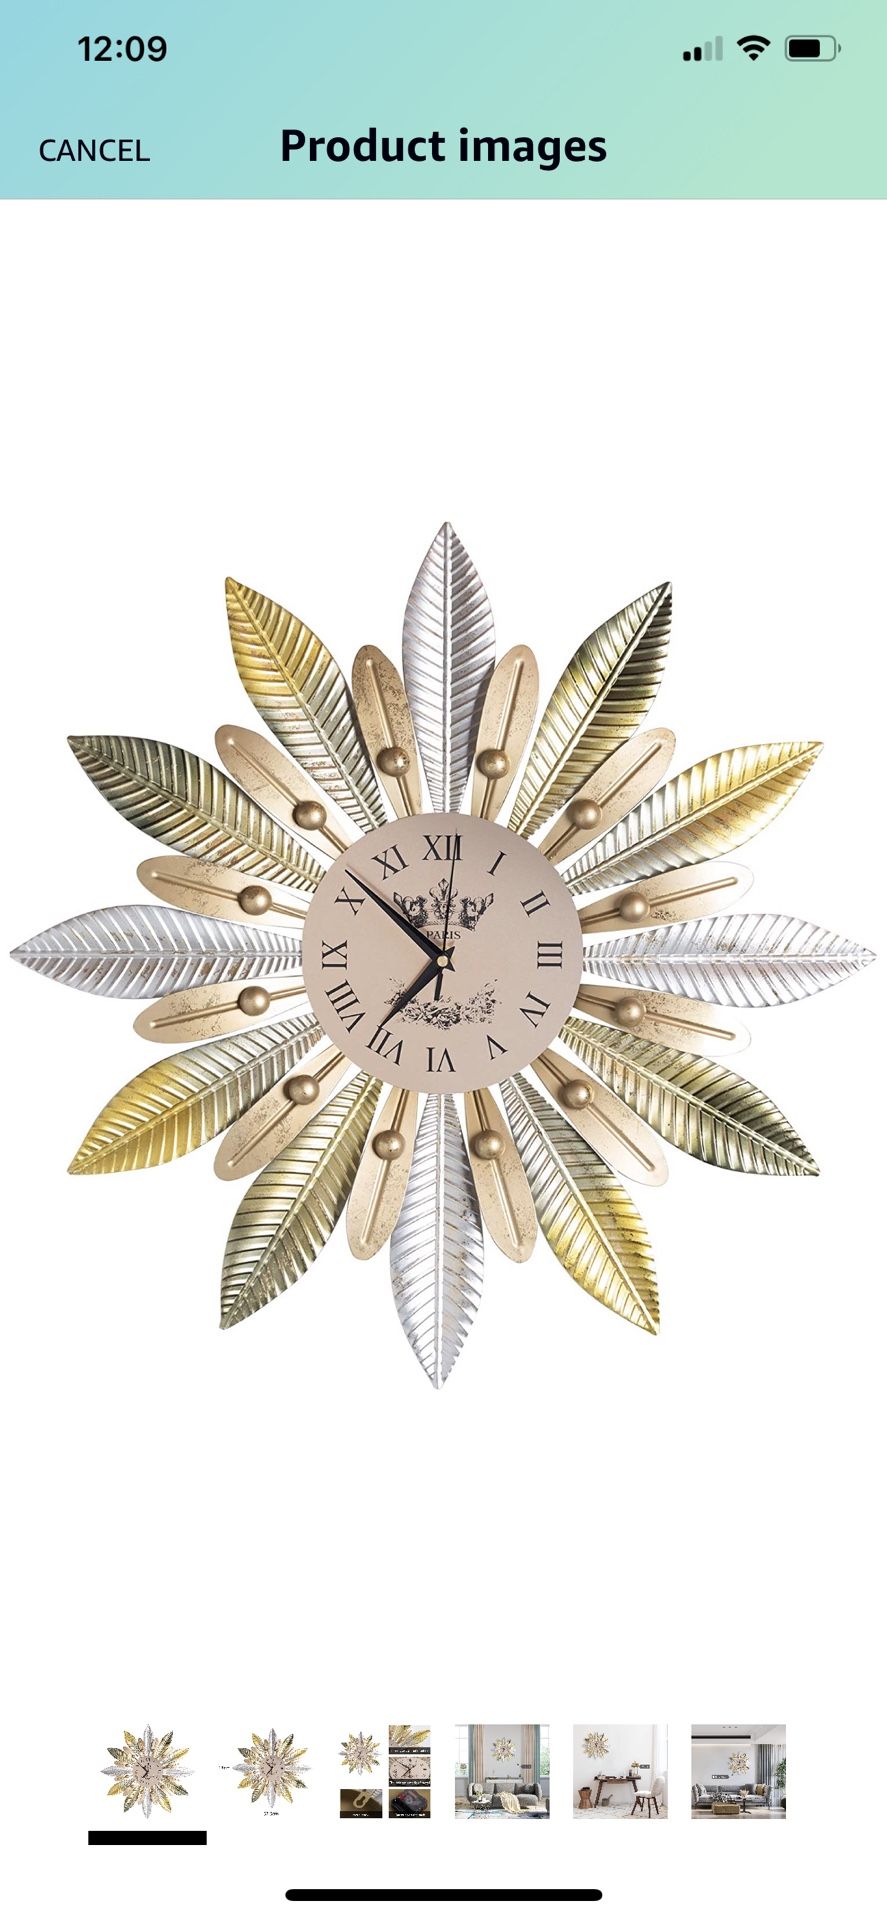 Brand new Ghytdf Large Decorative Wall Clock, 23" inch d Oversized Retro Metal Leaf Roman Numeral Country Style Home Decor Ideal for Living Room Wall